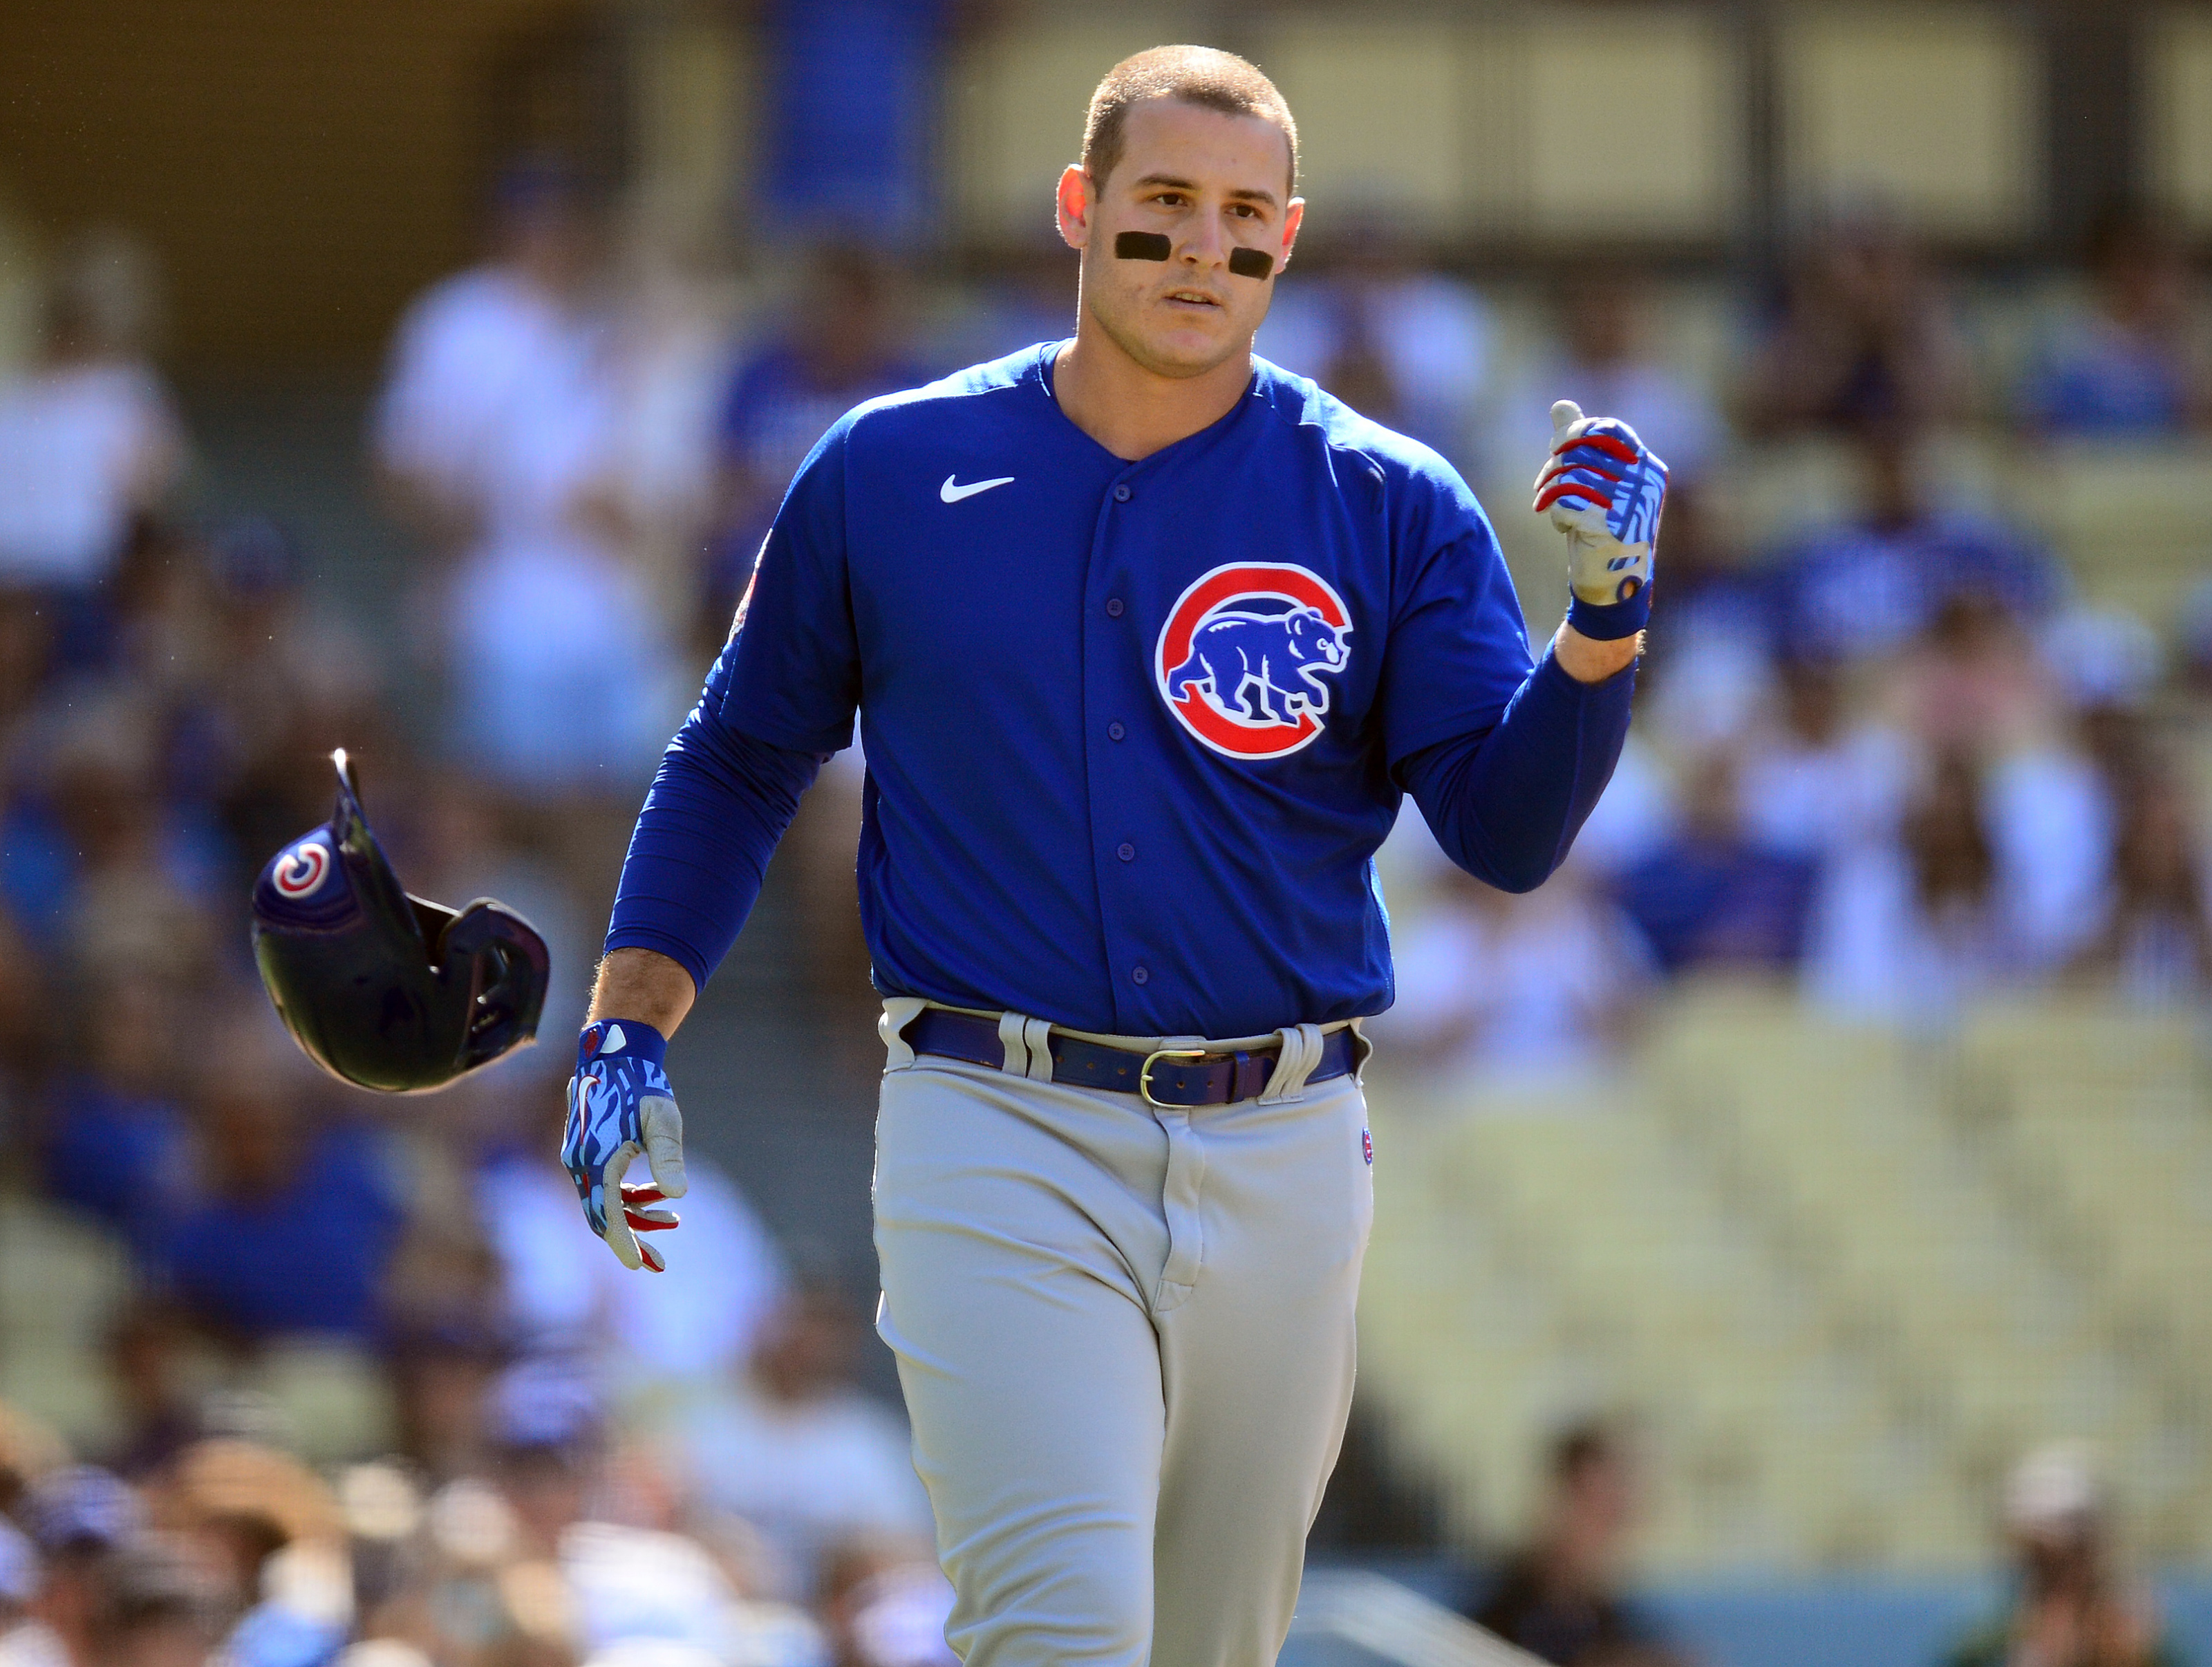 Chicago Cubs: Anthony Rizzo failing as a leader for future